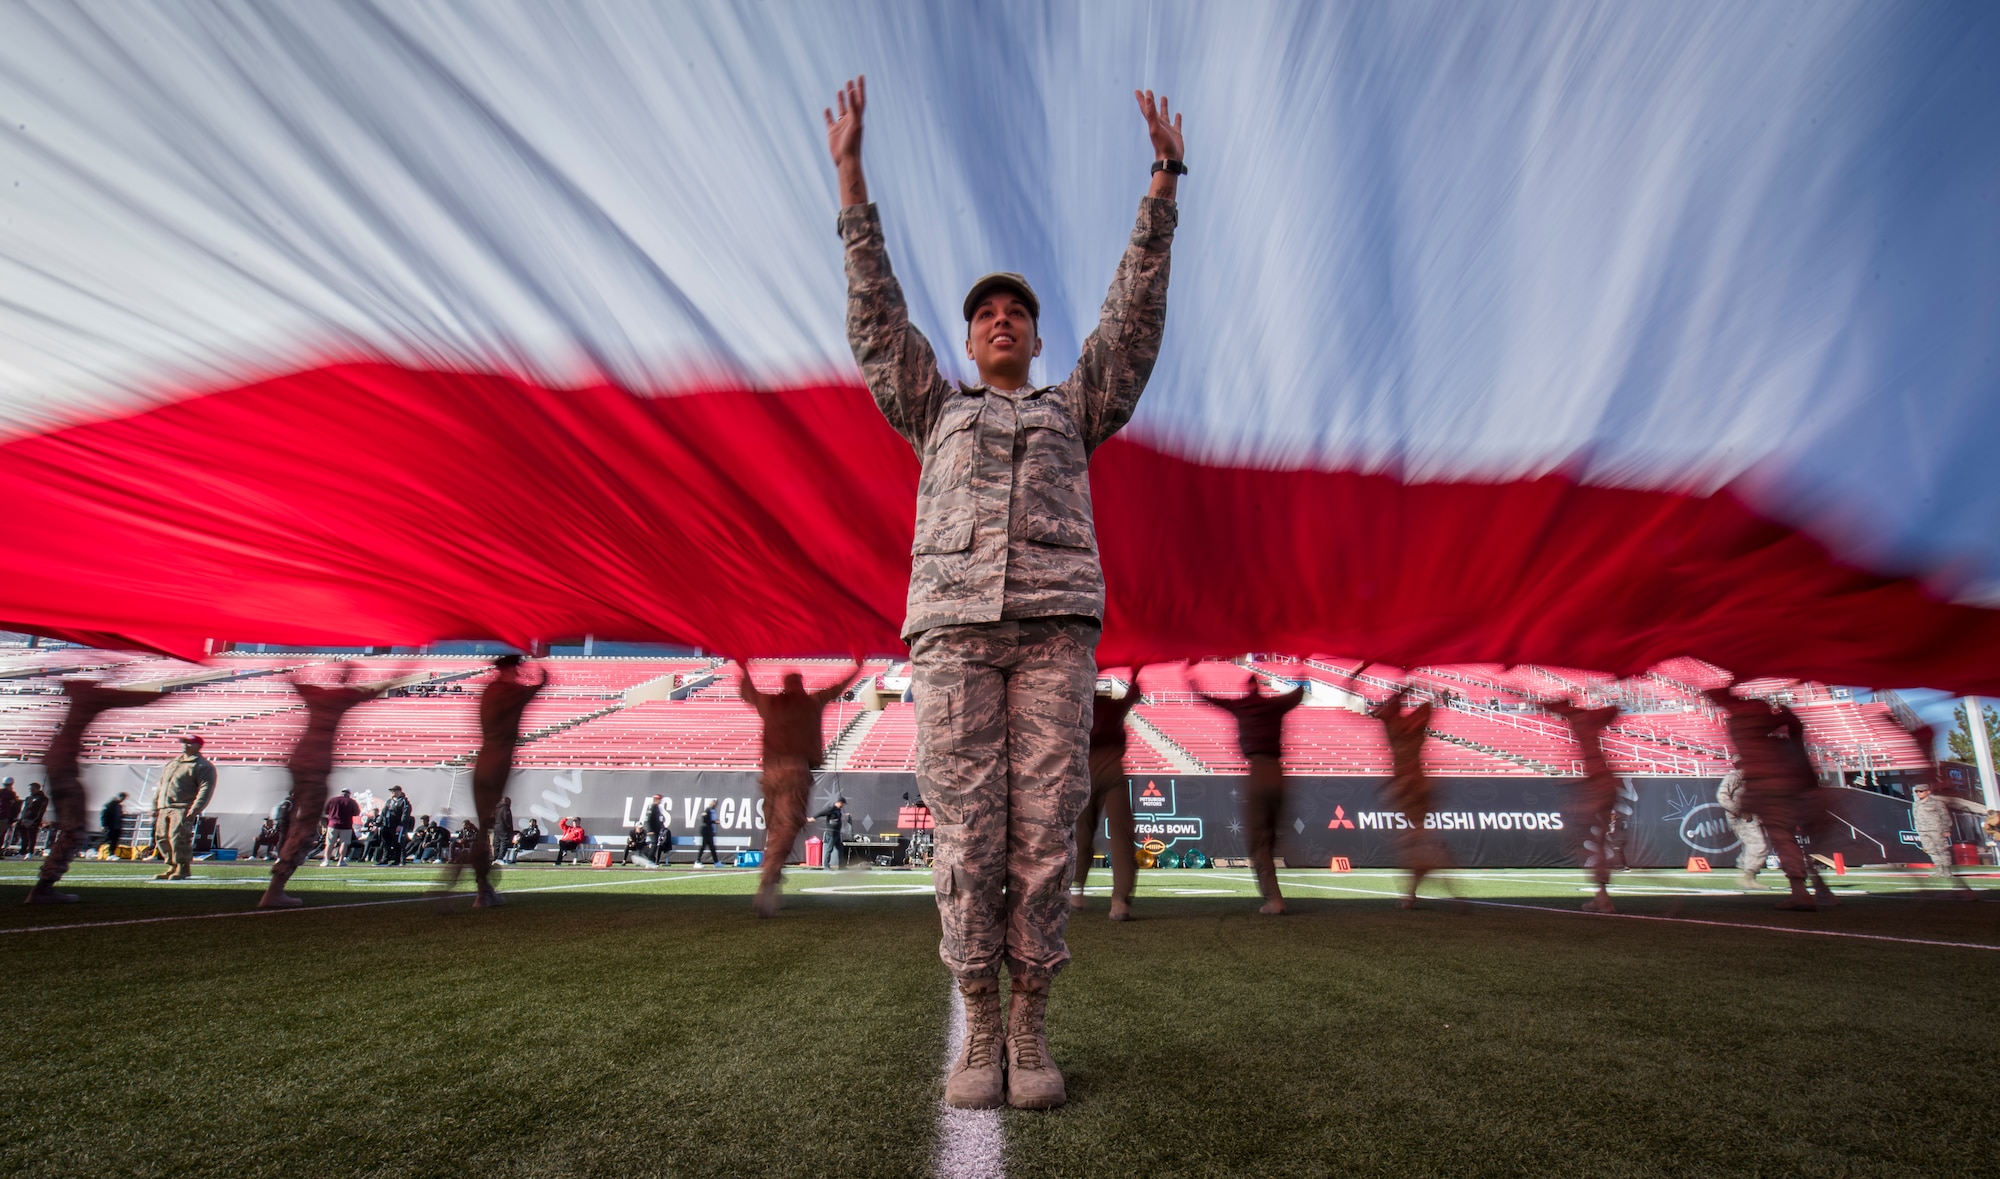 An Airman helps keep the American flag off the ground during the 2018 Las Vegas Bowl